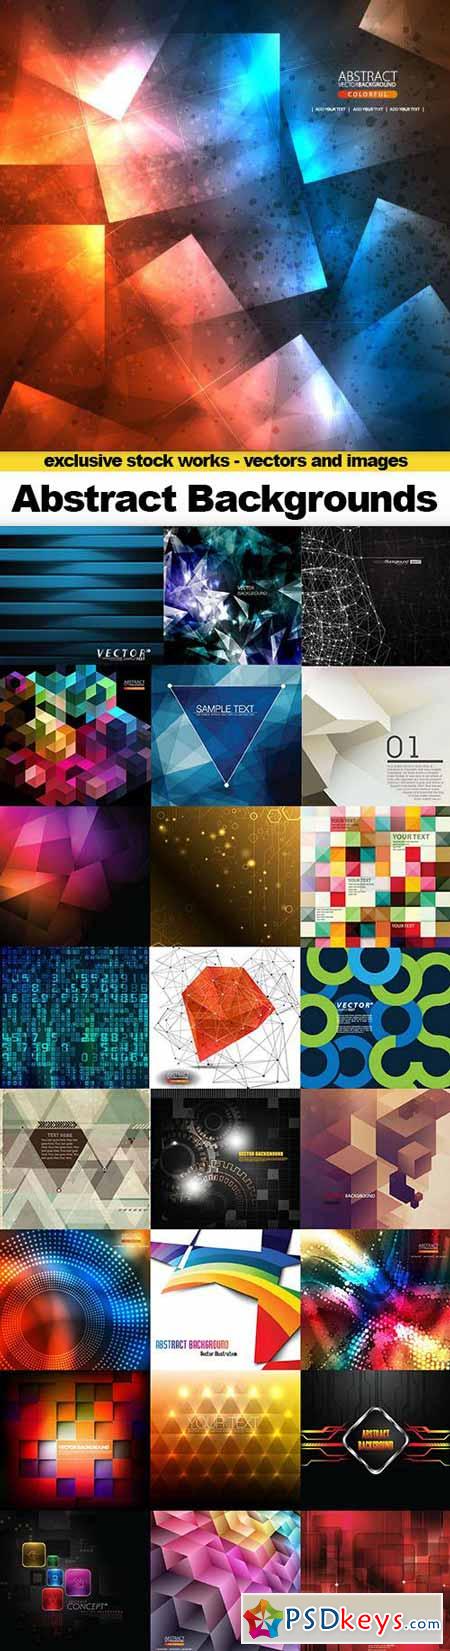 Amazing Abstract Backgrounds Collection - 25xEPS